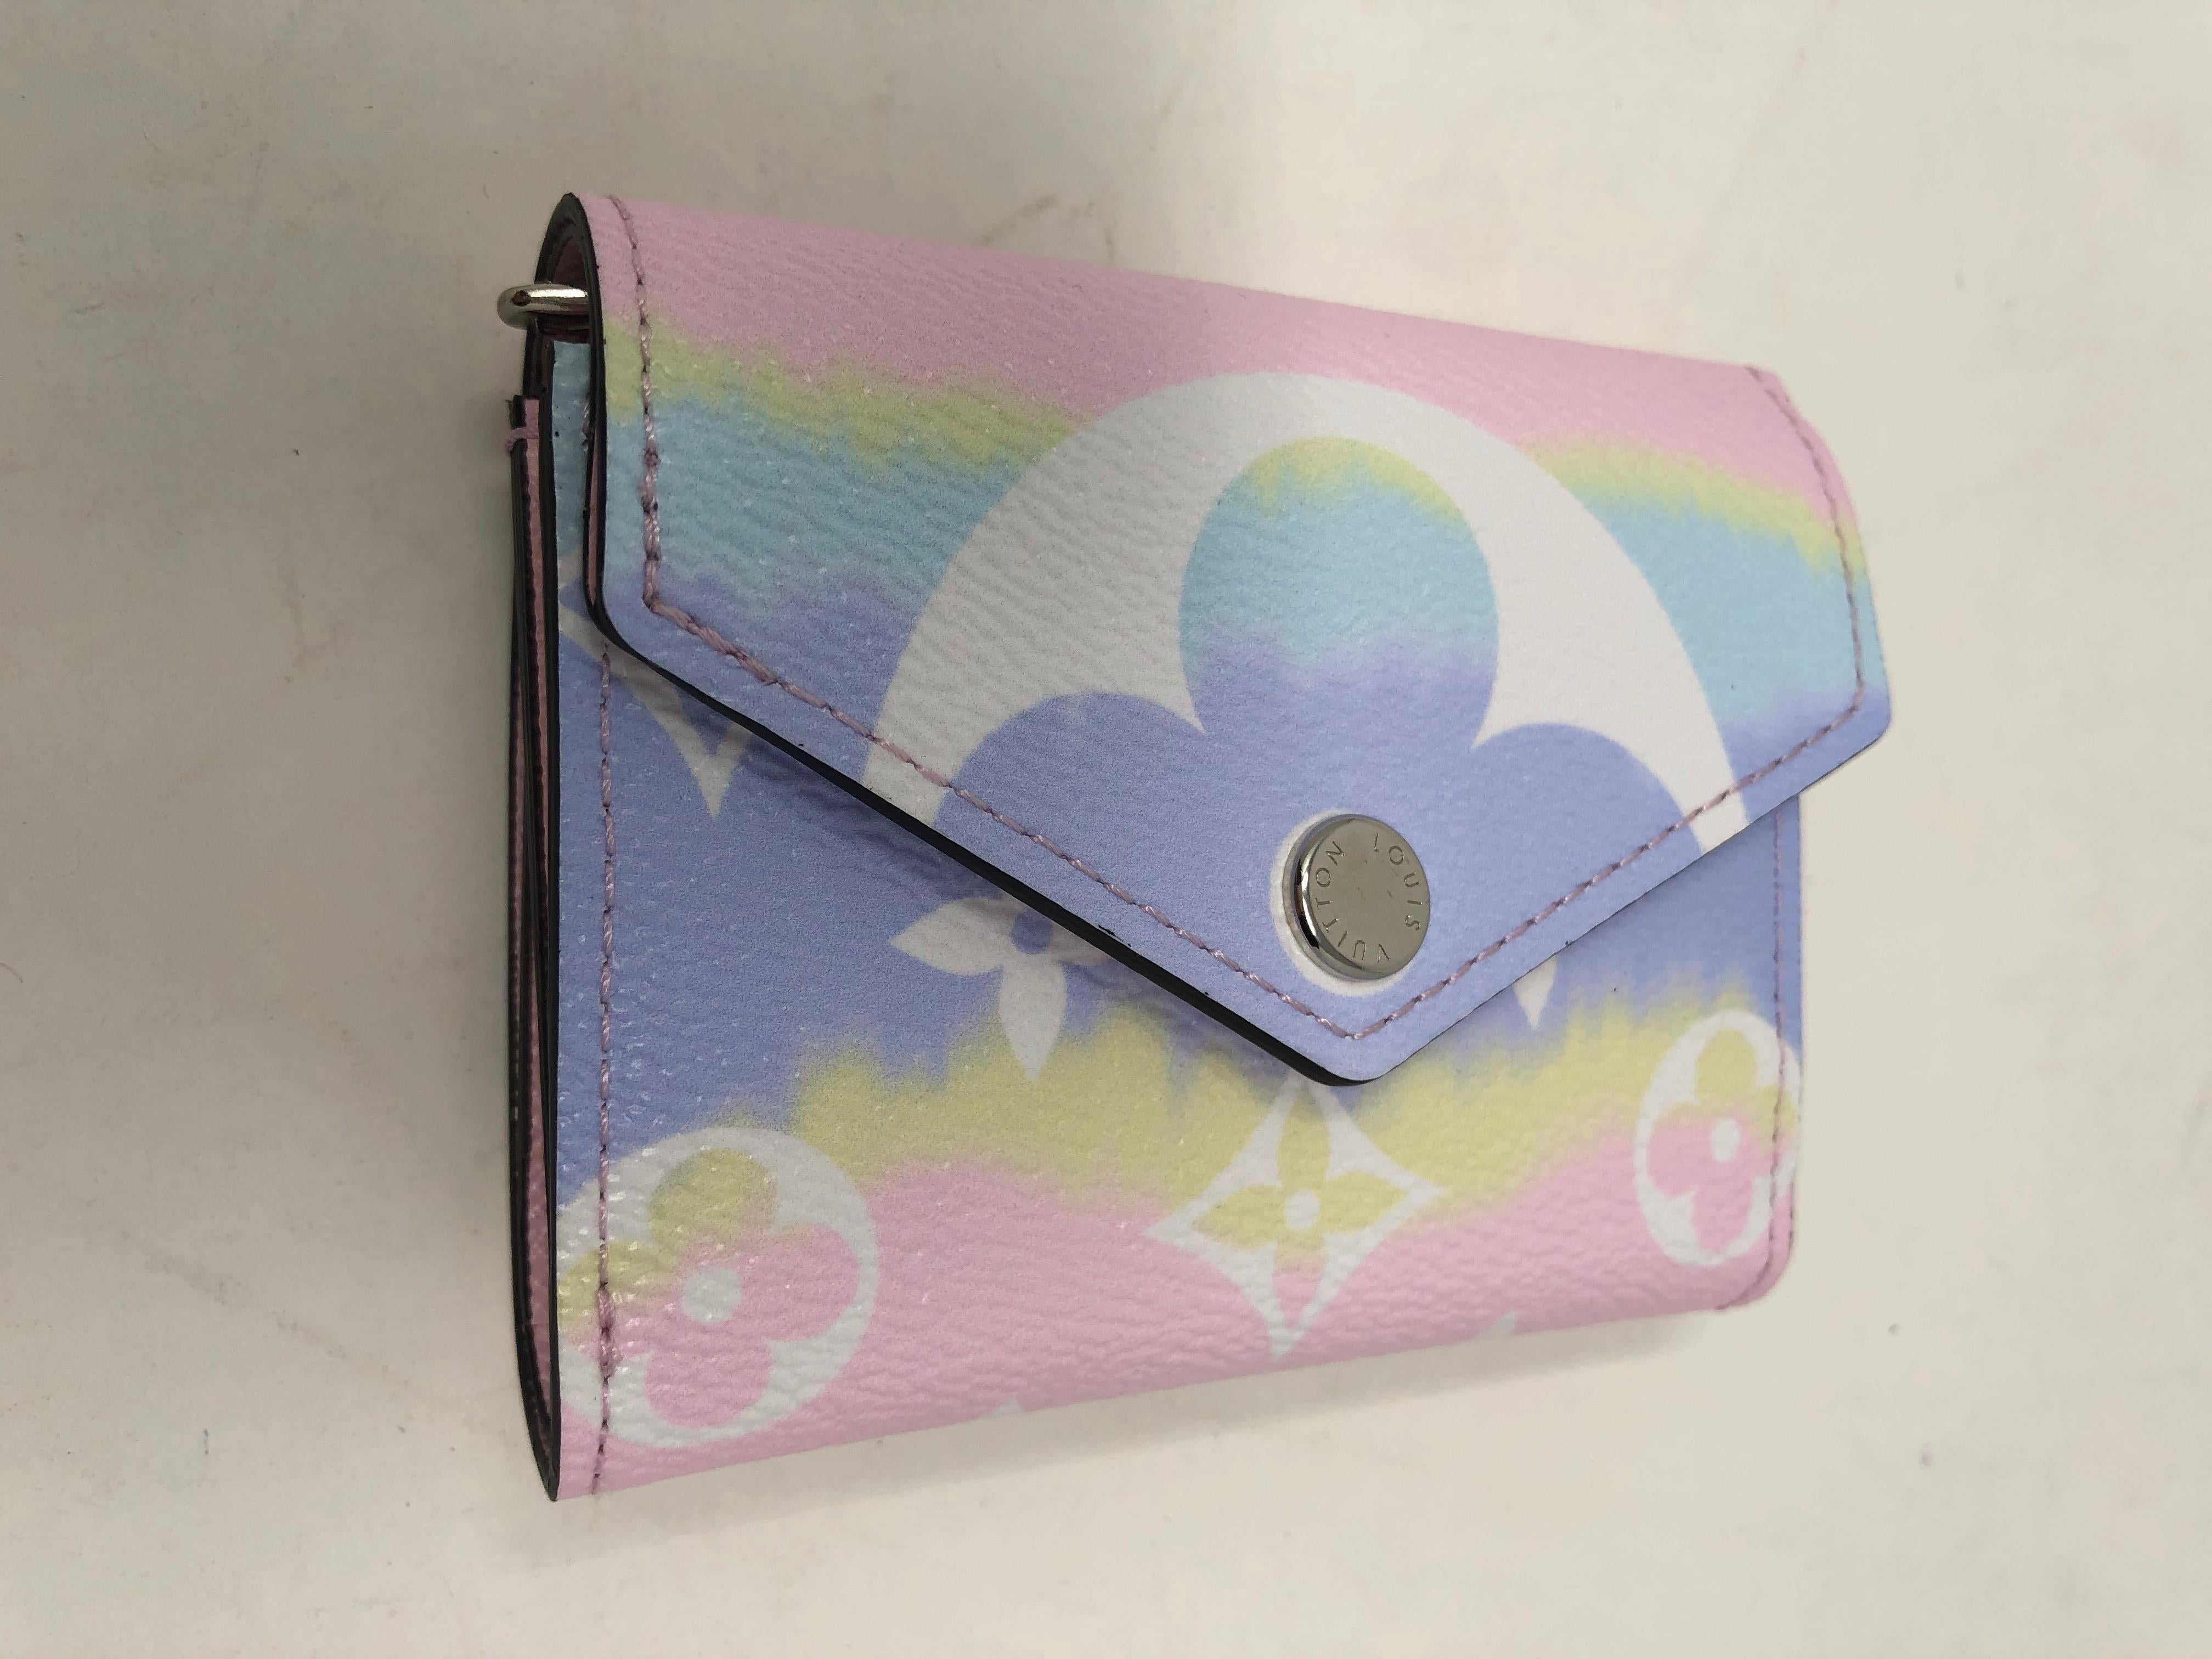 Louis Vuitton Escale Pink Zoe Wallet. Compact small wallet in pretty pastel shades. Sold out collection. Limited in production. Brand new in box with dust cover. The look for this collection was inspired by Japanese shibori tie- dyeing process. Hard